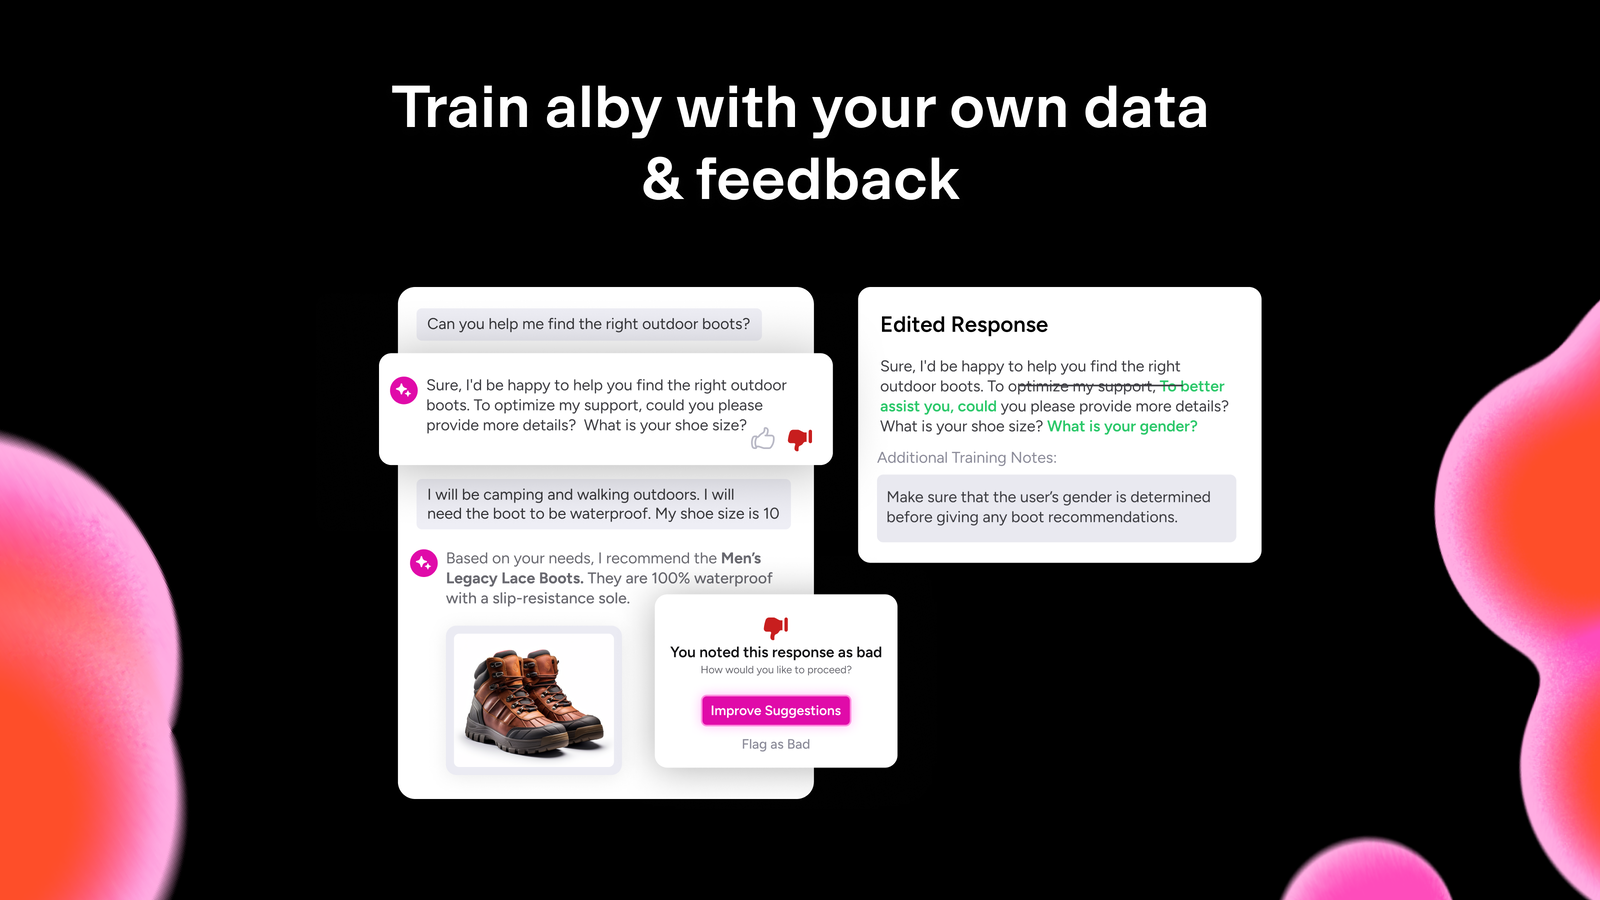 Train with your own data and feedback